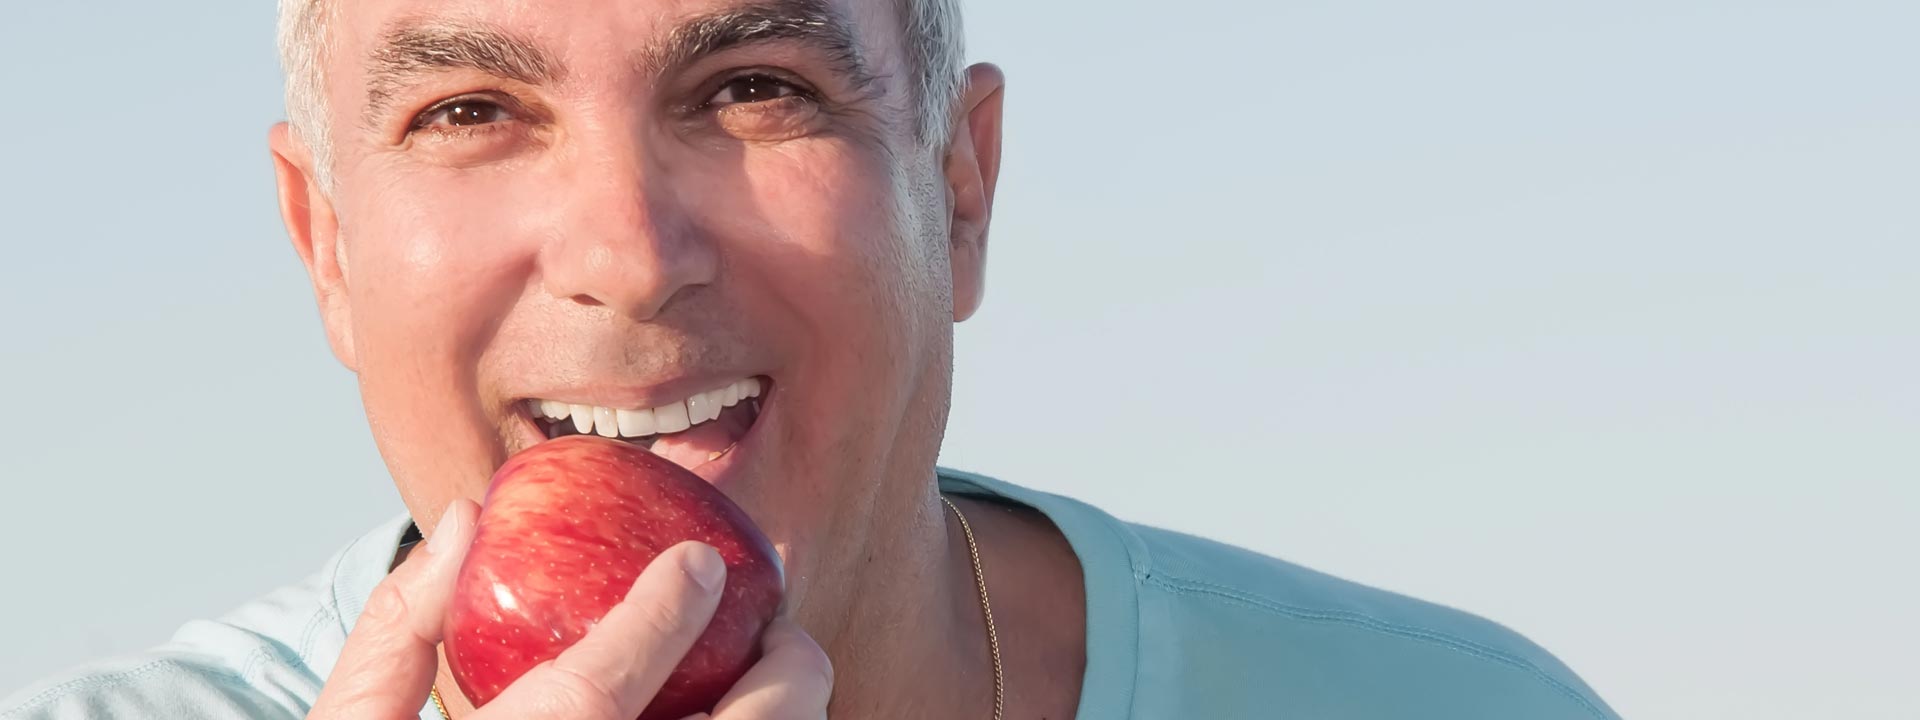 A man happily eating an apple after having root canal treatment